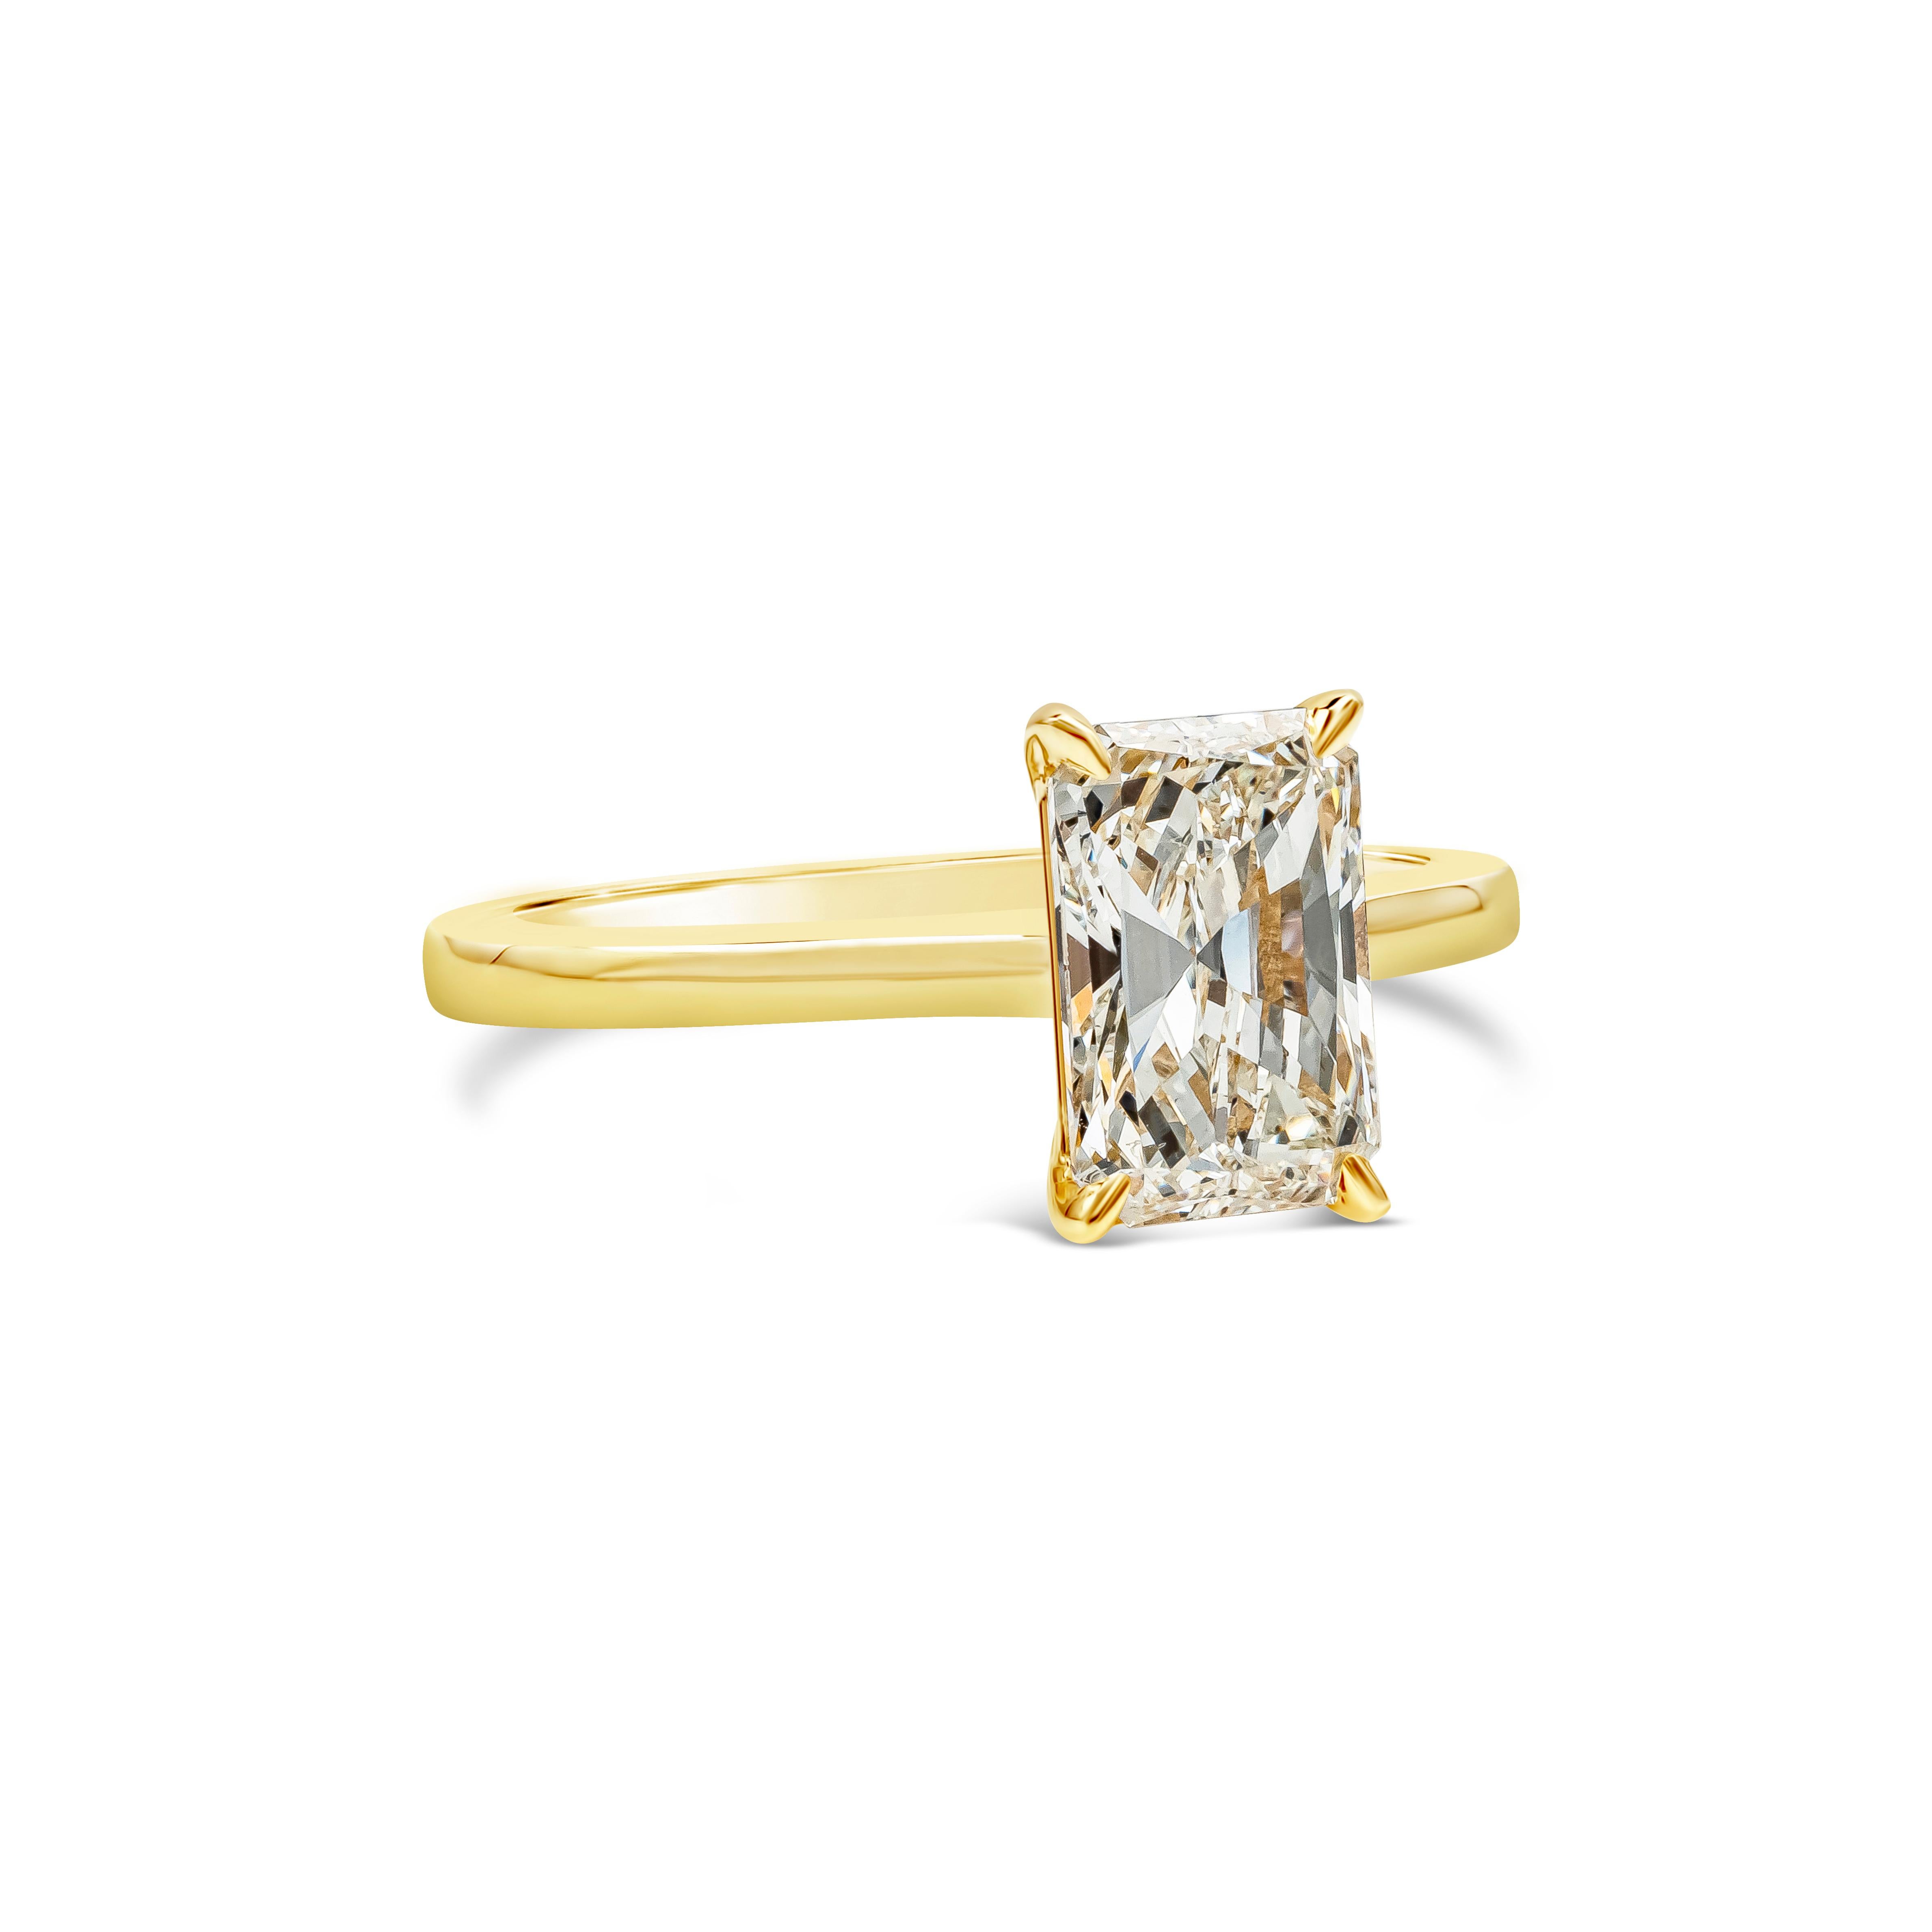 A beautiful engagement ring showcasing a 1.66 carats elongated radiant cut diamond certified by GIA as K color, VS2 in clarity, set in a simple solitaire four prong basket setting and  made in 18K yellow gold. Size 6.25 US and resizable upon